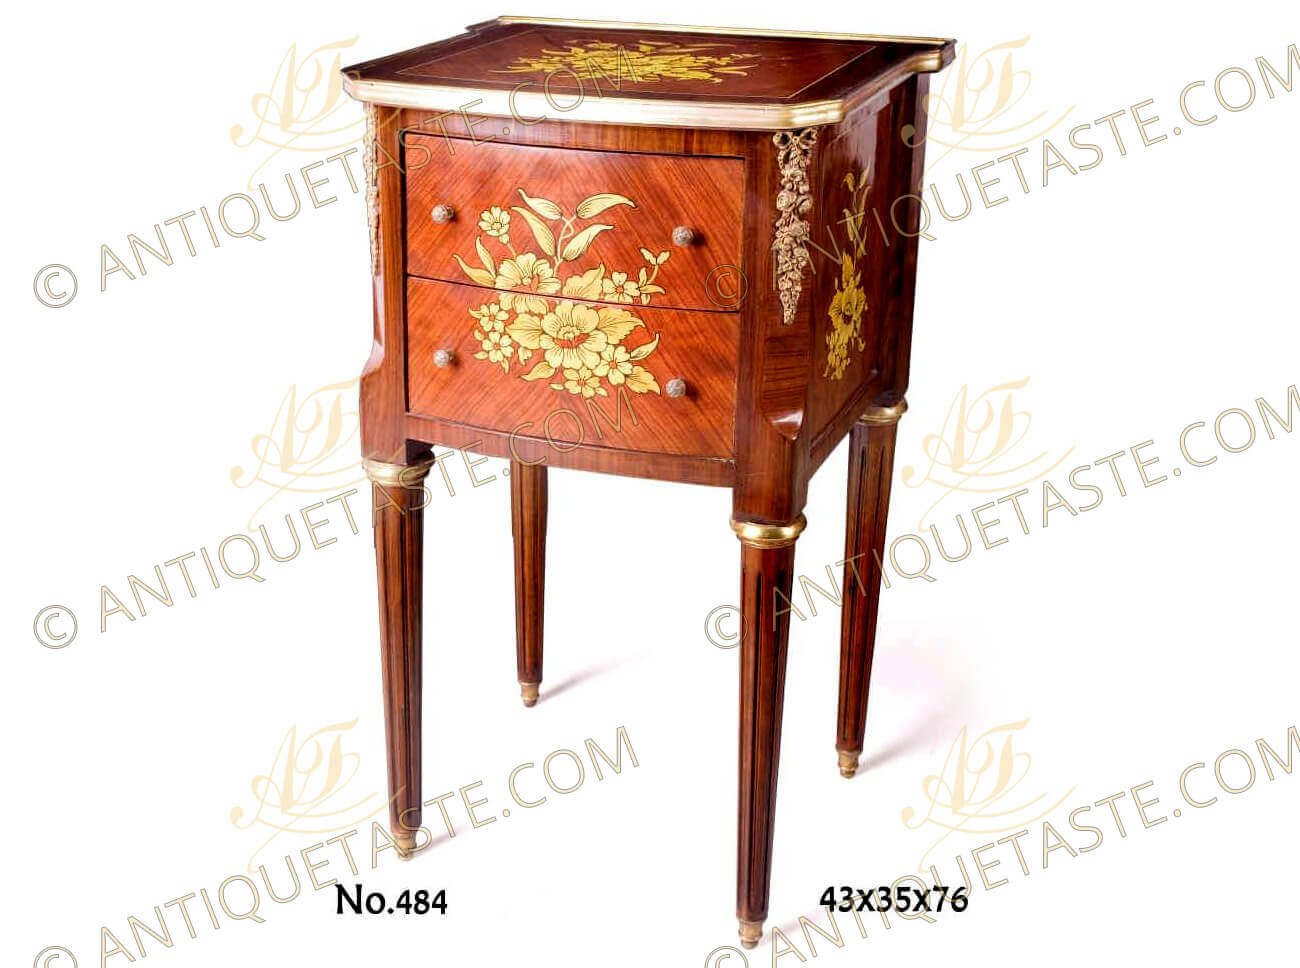 A French Louis XVI style ormolu-mounted foliate marquetry and veneer inlaid two drawers Night Stand; ornamented with flower bouquet marquetry patterns and ribbon tied ormolu chutes